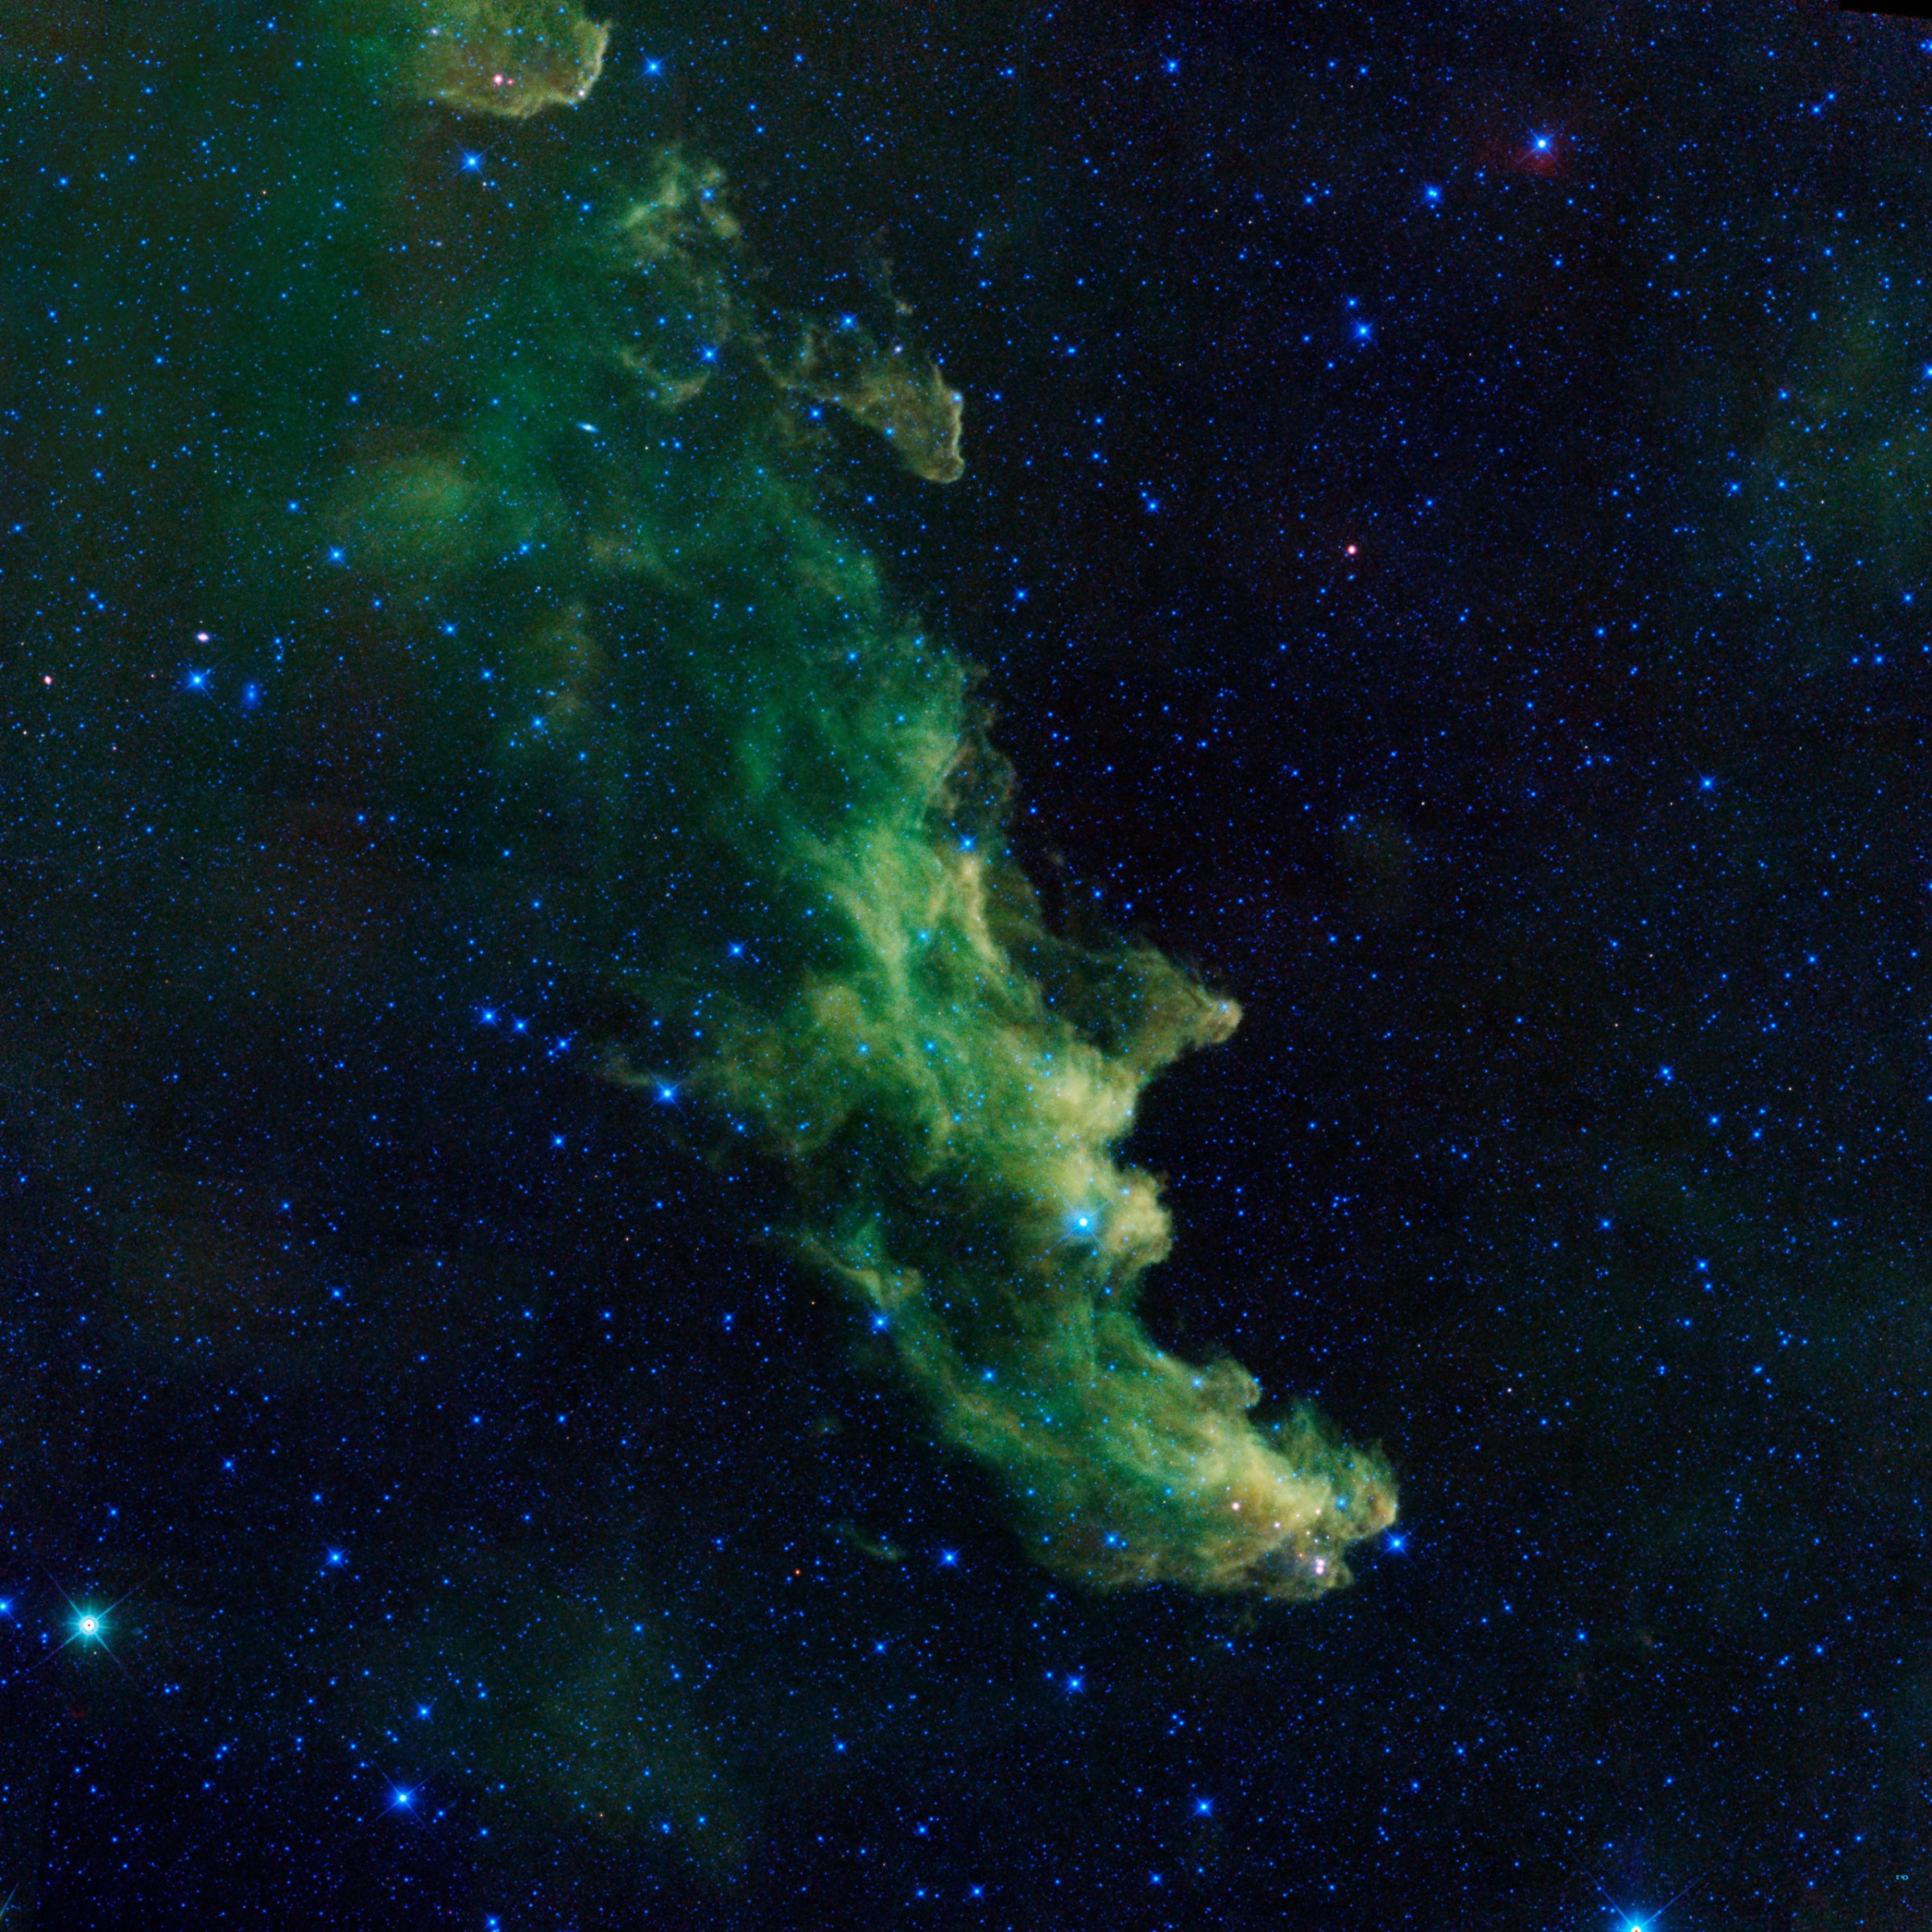 Witch Head' Brews Baby StarsA witch appears to be screaming out into space in this new image from NASA's Wide-Field Infrared Survey Explorer, or WISE. The infrared portrait shows the Witch Head nebula, named after its resemblance to the profile of a wicked witch. Astronomers say the billowy clouds of the nebula, where baby stars are brewing, are being lit up by massive stars. Dust in the cloud is being hit with starlight, causing it to glow with infrared light, which was picked up by WISE's detectors.The Witch Head nebula is estimated to be hundreds of light-years away in the Orion constellation, just off the famous hunter's knee.WISE was recently "awakened" to hunt for asteroids in a program called NEOWISE. The reactivation came after the spacecraft was put into hibernation in 2011, when it completed two full scans of the sky, as planned.Image credit: NASA/JPL-Caltech